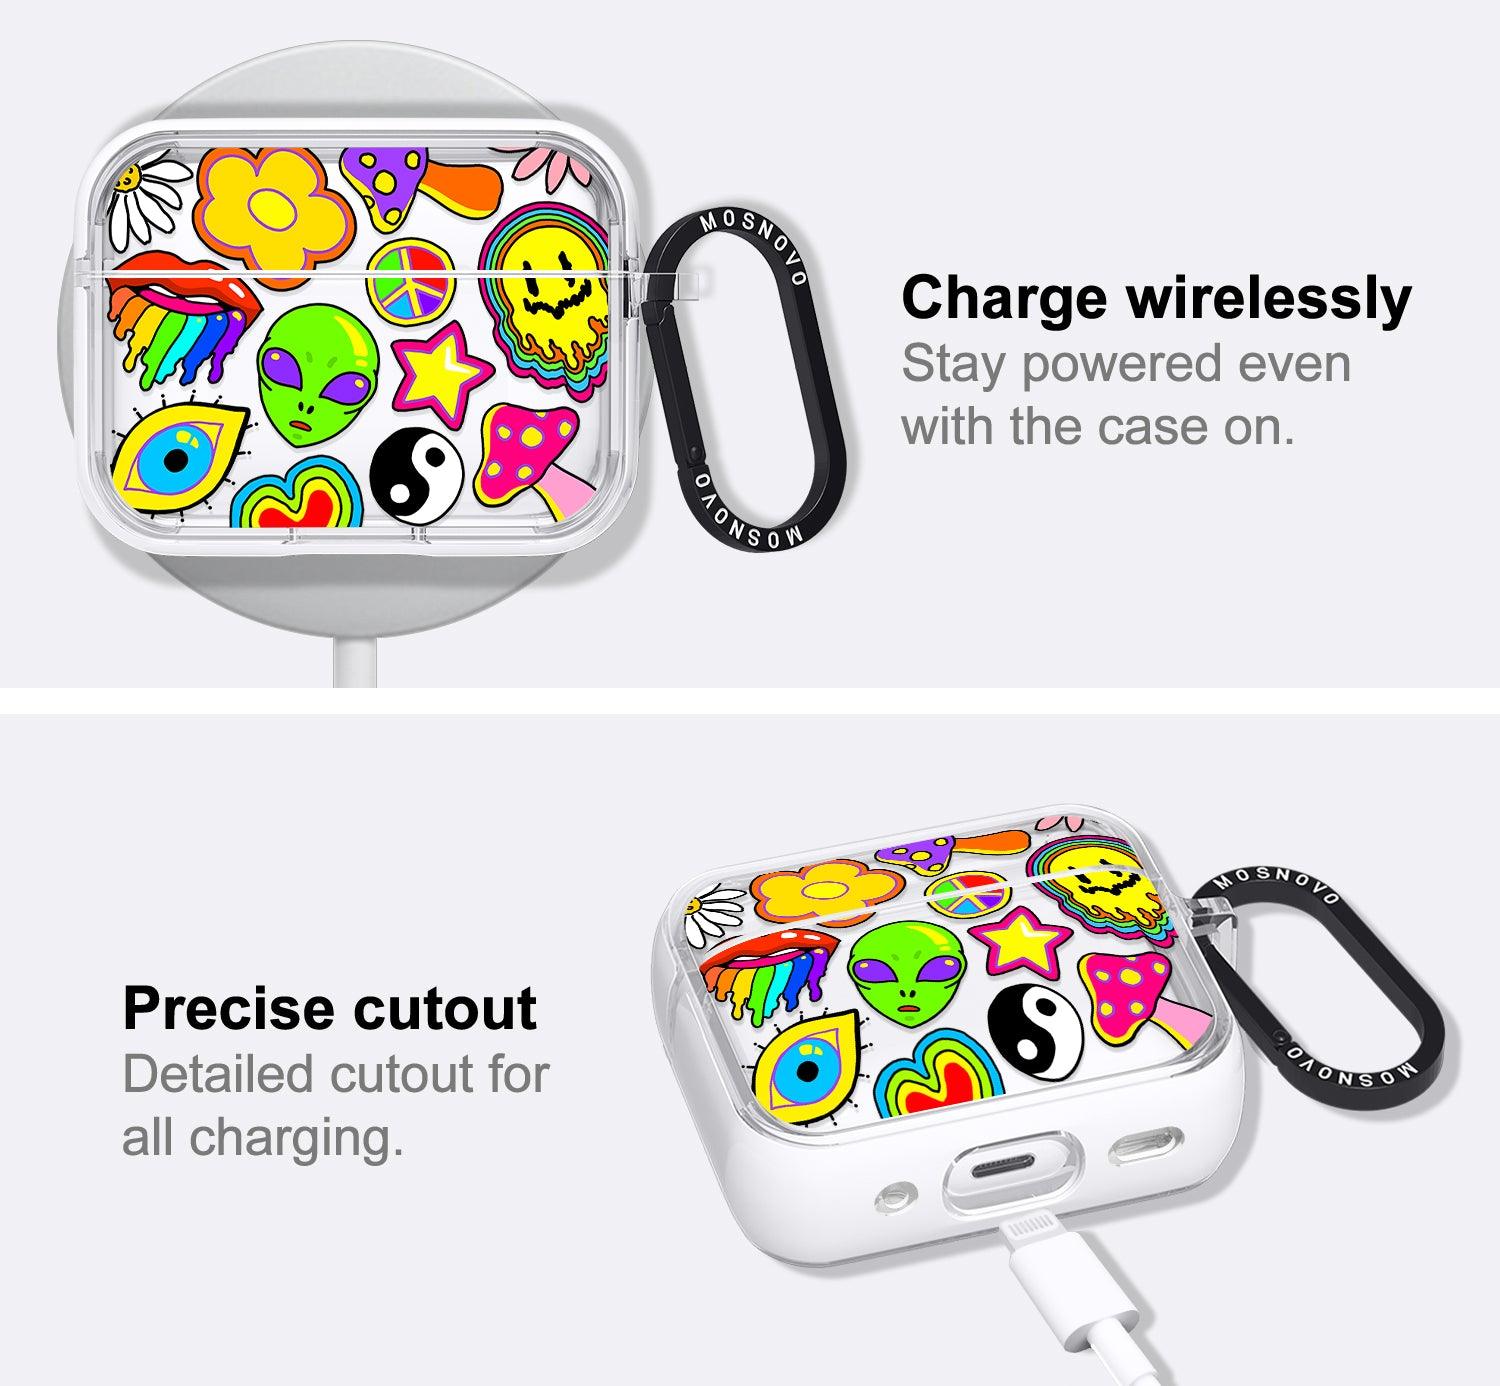 Hippie Print AirPods Pro 2 Case (2nd Generation) - MOSNOVO